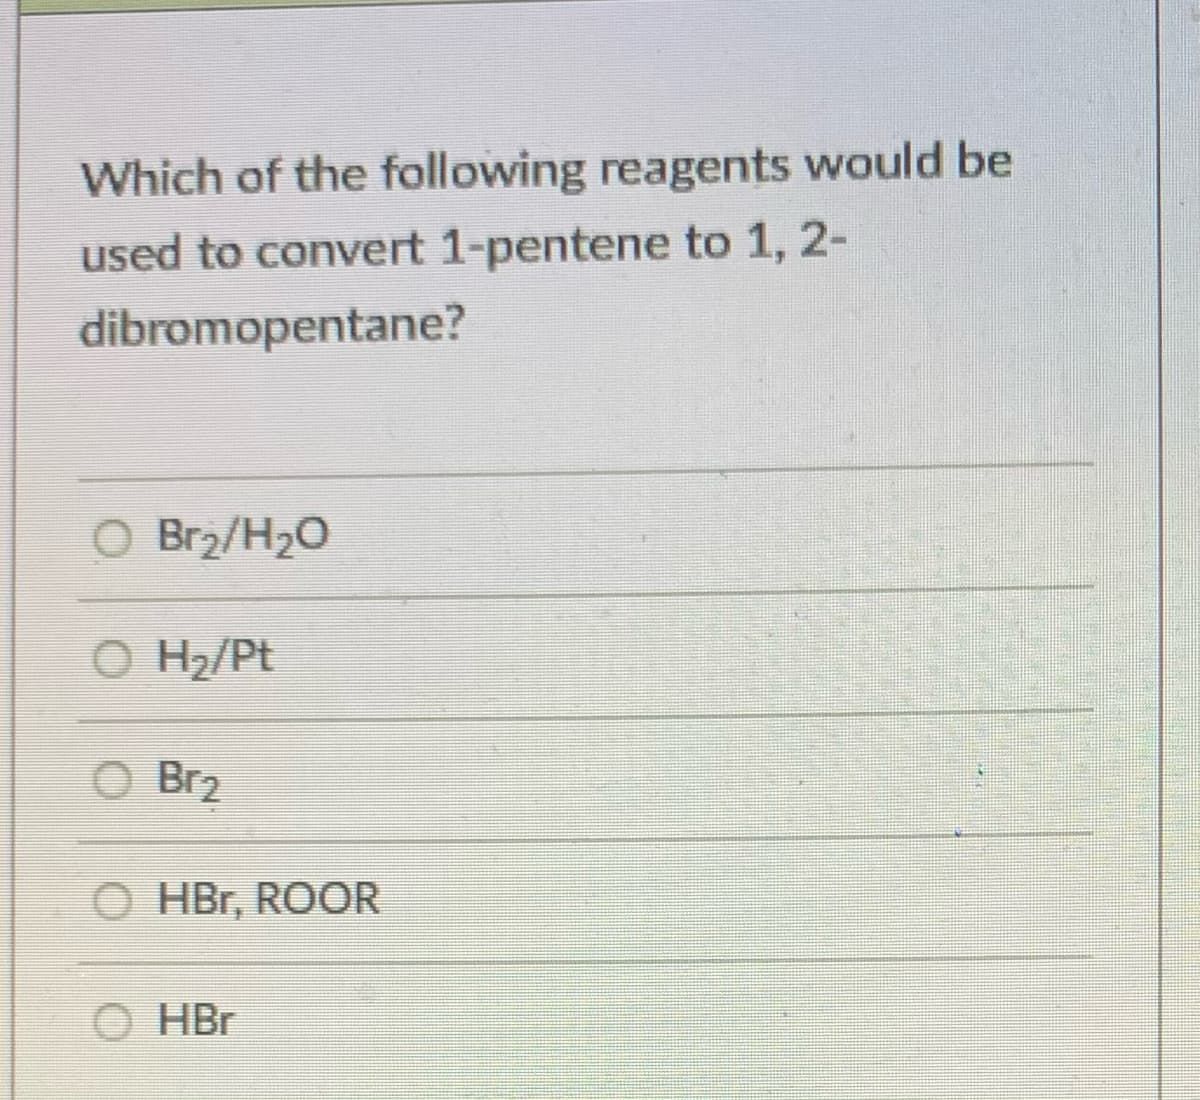 Which of the following reagents would be
used to convert 1-pentene to 1, 2-
dibromopentane?
O Br2/H20
O H2/Pt
O Br2
HBr, ROOR
O HBr
